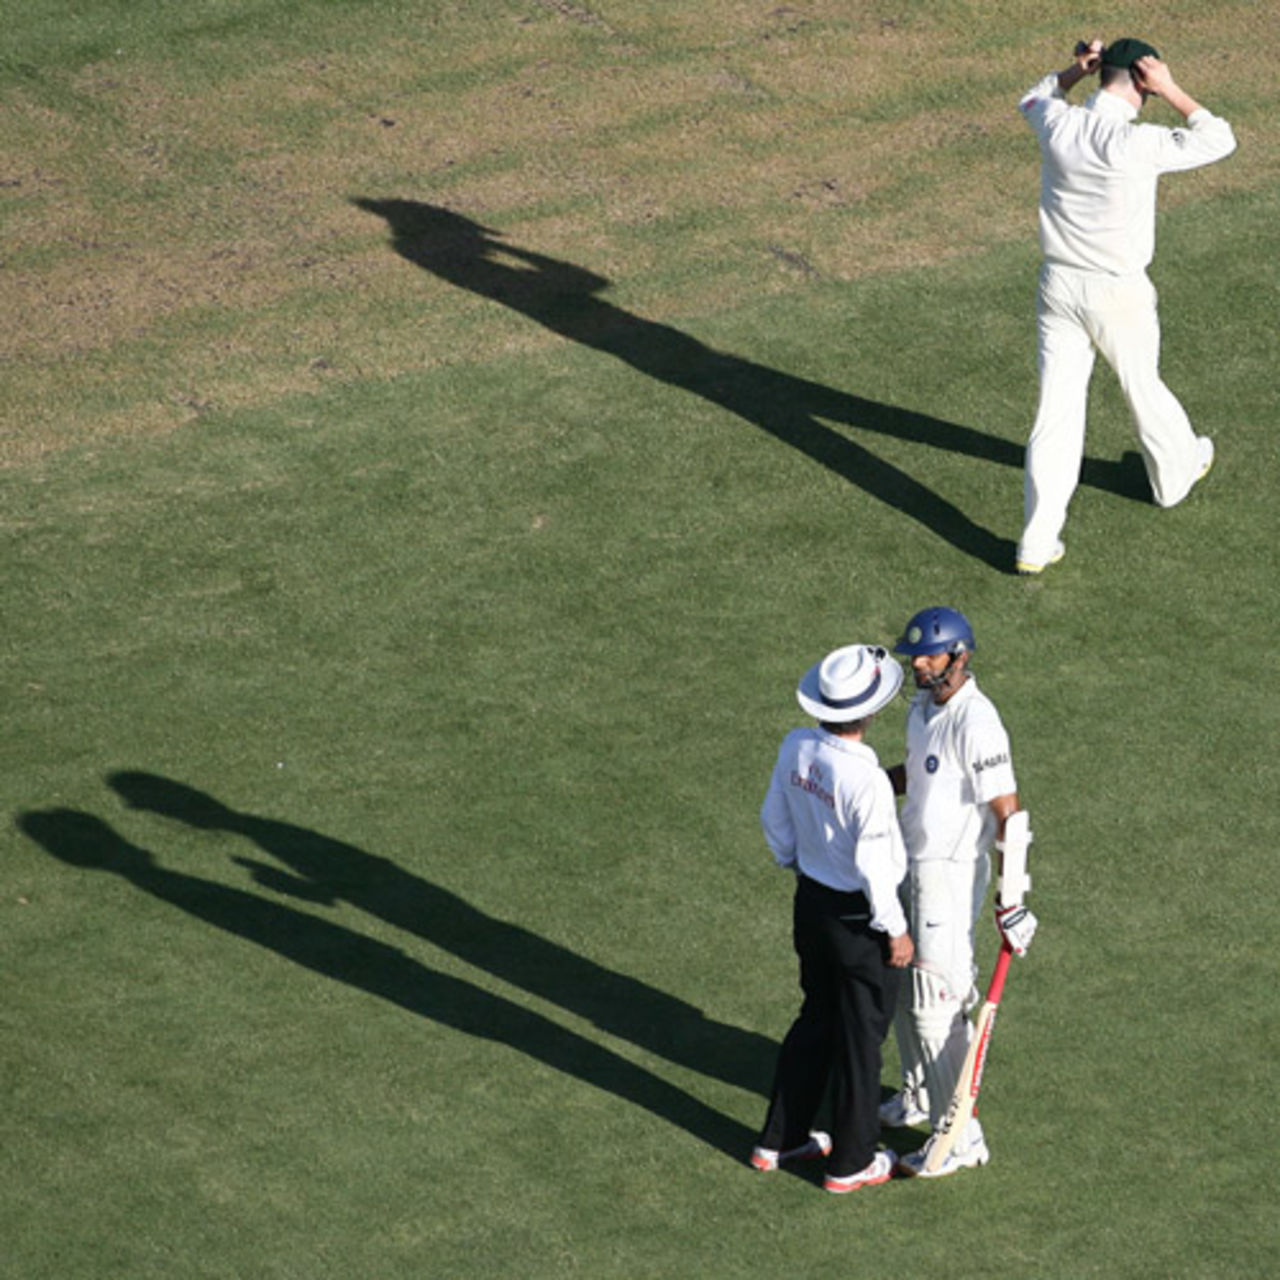 Rahul Dravid lodges his protest with Billy Bowden, while Michael Clarke, who rushed through an over, walks away, Australia v India, 3rd Test, 1st day, Perth, January 16, 2008 